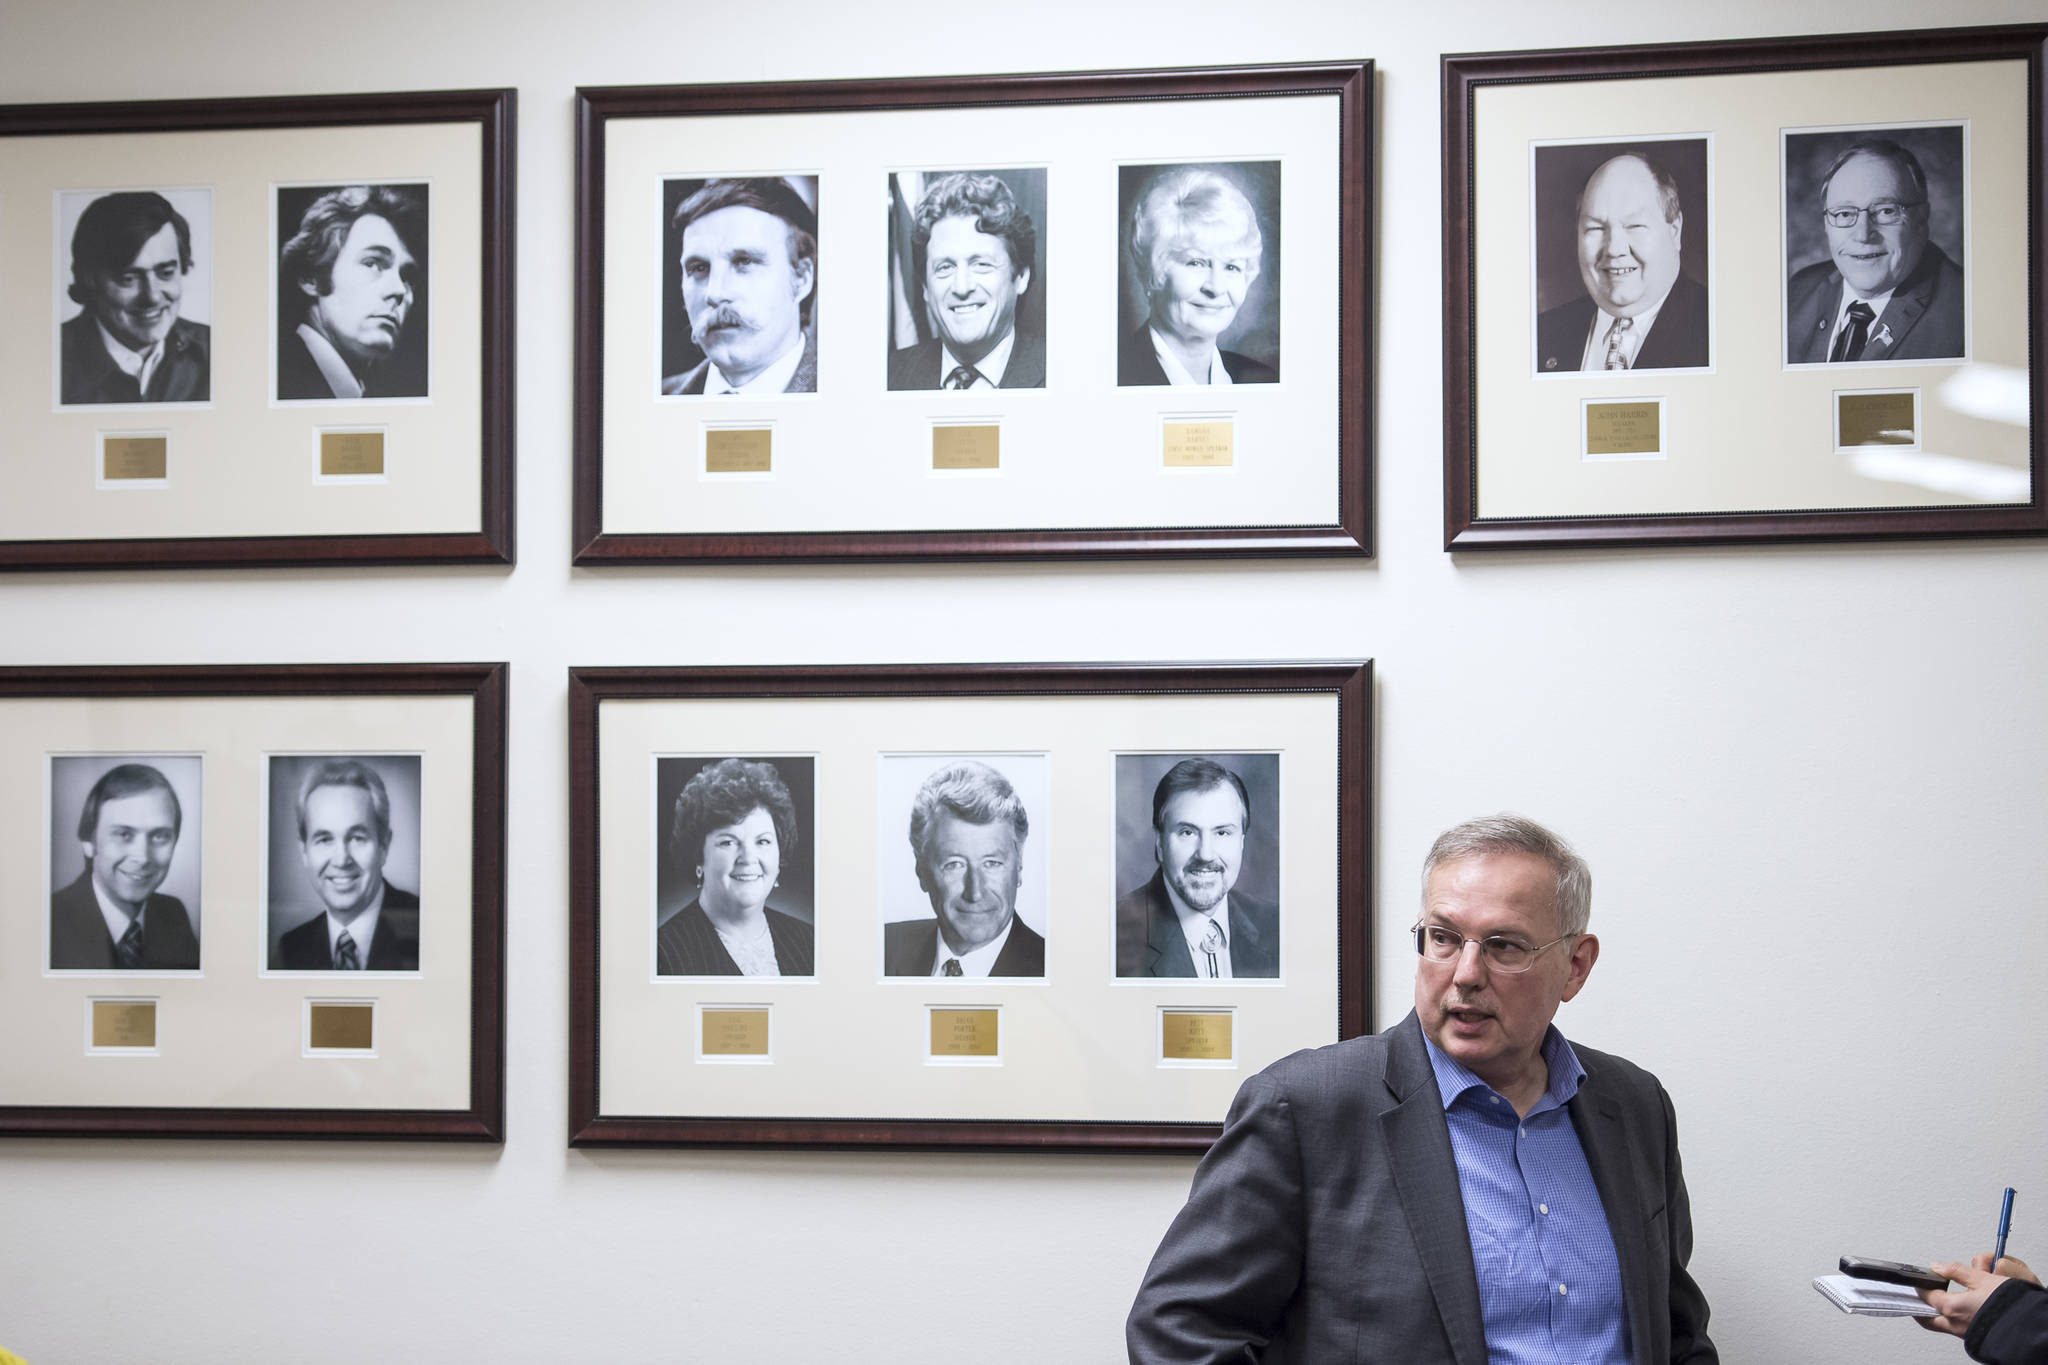 Former Speaker of the House Bryce Edgmon, D-Dillingham, is interviewed in front of pictures of former Speakers at the Capitol on Wednesday, Jan. 16, 2019. (Michael Penn | Juneau Empire)